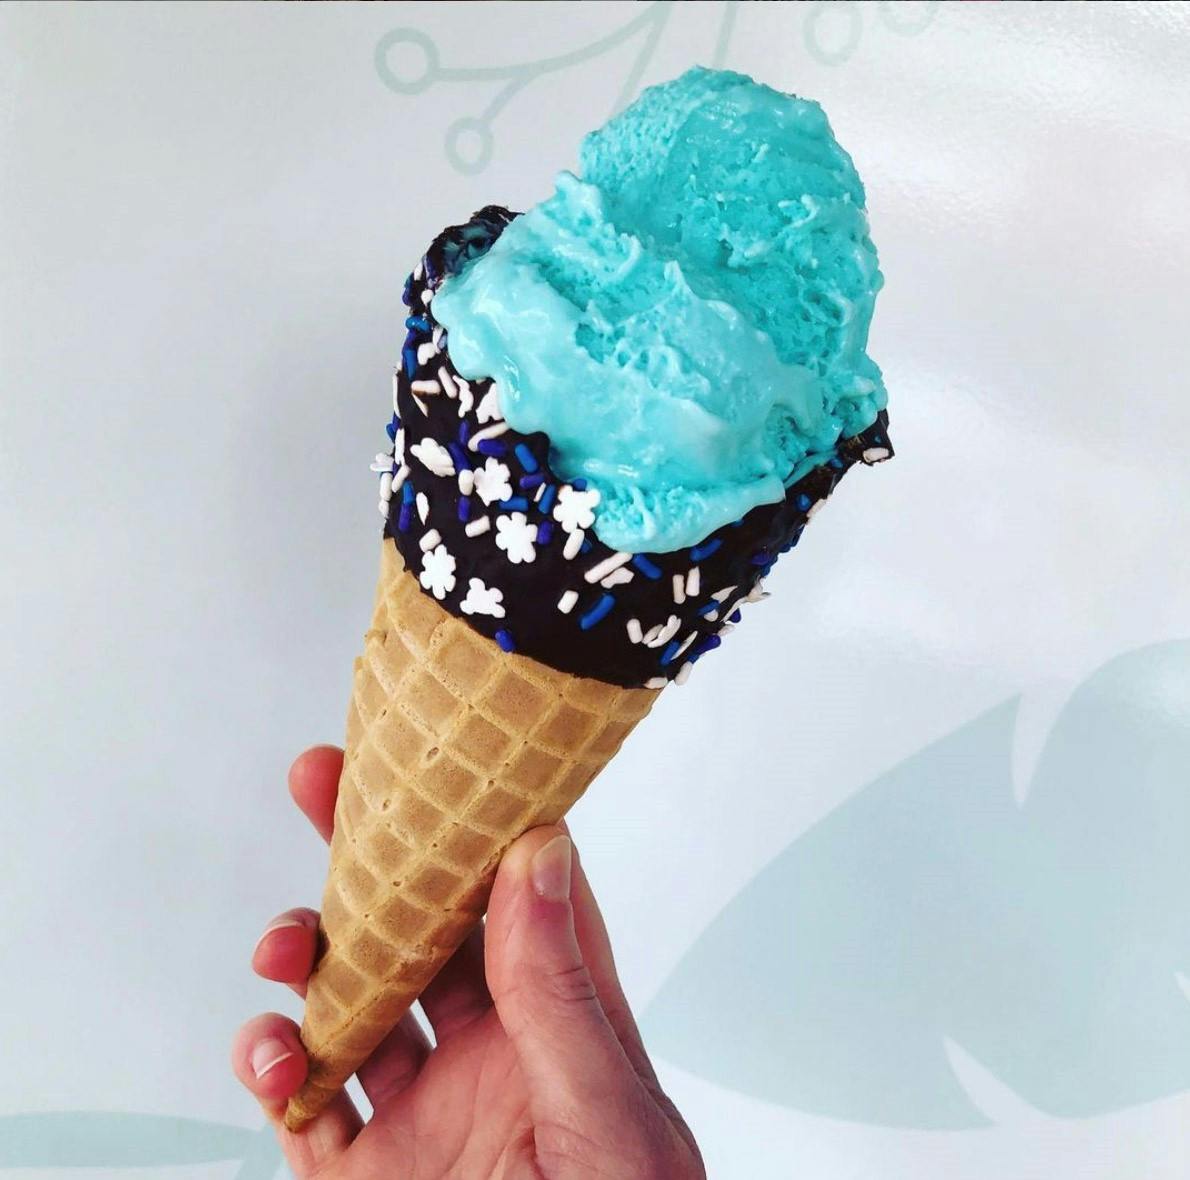 Blue Moon Ice Cream, A Midwest Cult Favorite, Has Delicious Mystery